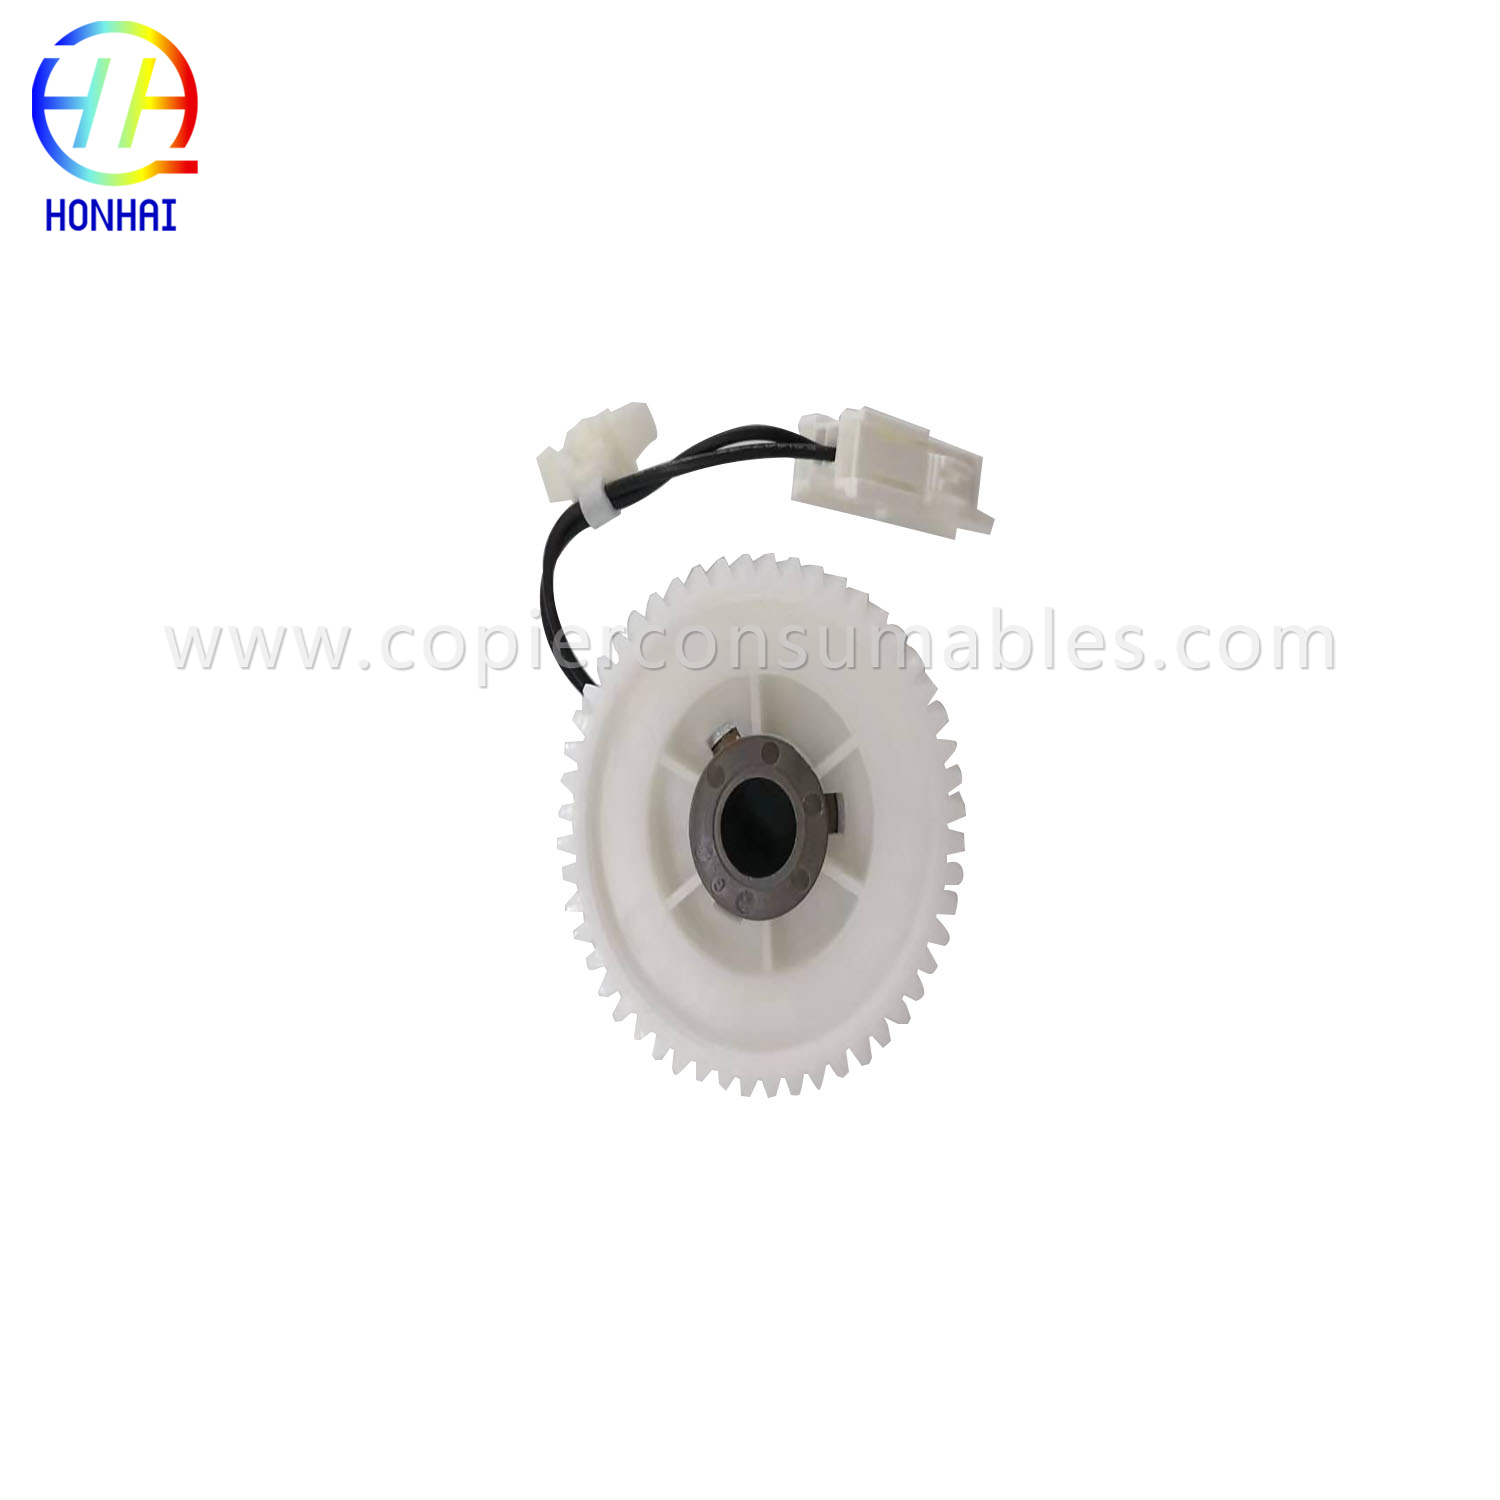 Clutch Assembly for Xerox 1100 4110 4112 4127 4595 9000 121K41980 (4) 拷贝